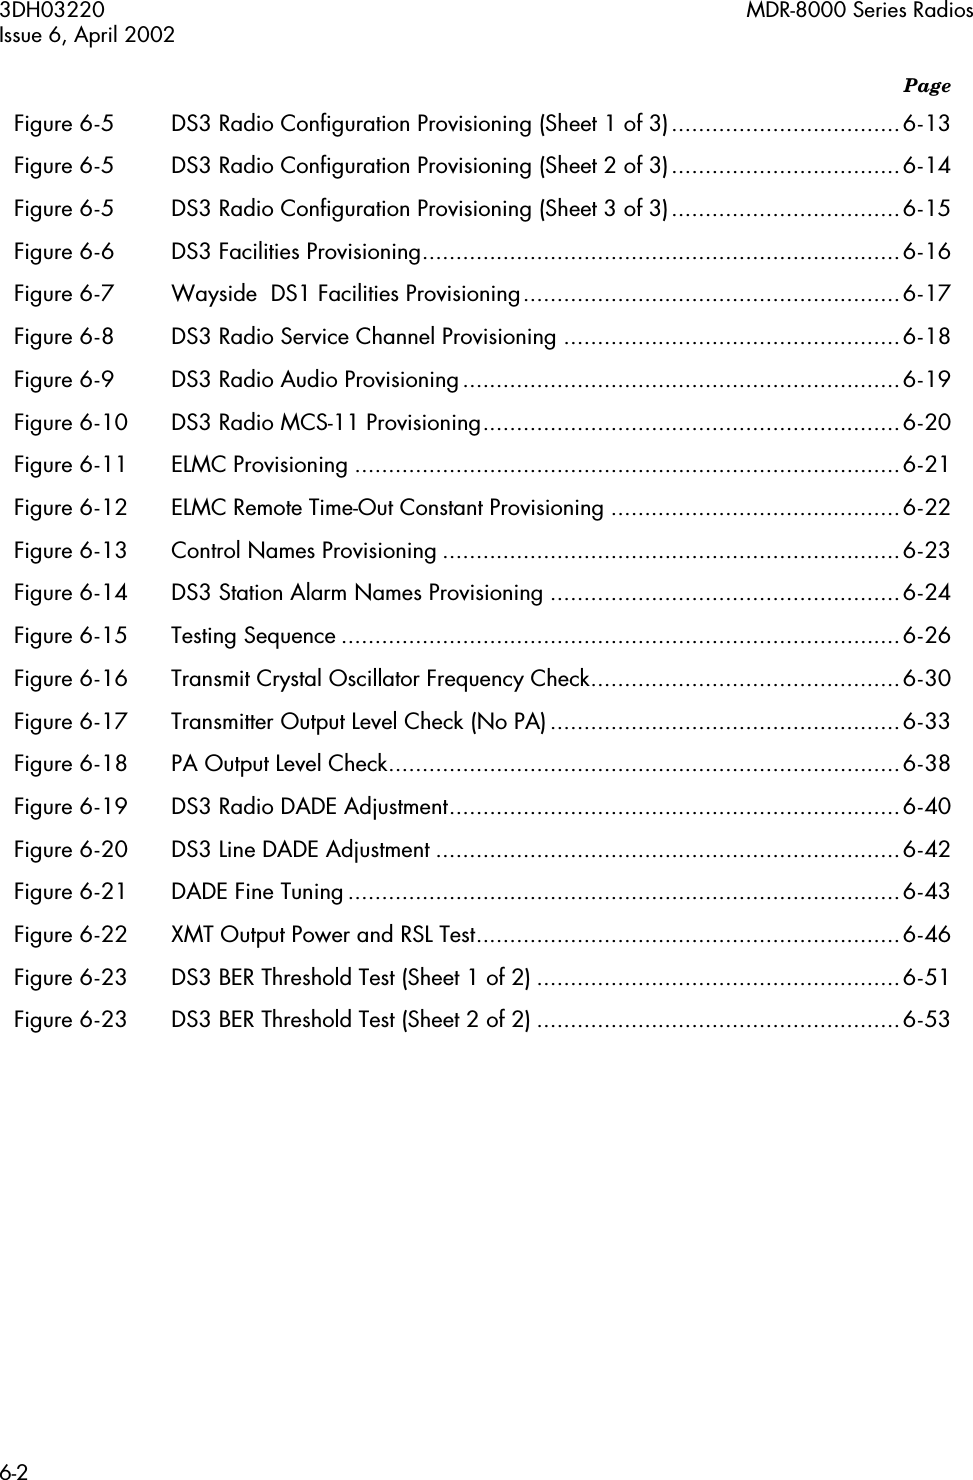  3DH03220 MDR-8000 Series RadiosIssue 6, April 20026-2 Page Figure 6-5 DS3 Radio Configuration Provisioning (Sheet 1 of 3)..................................6-13Figure 6-5 DS3 Radio Configuration Provisioning (Sheet 2 of 3)..................................6-14Figure 6-5 DS3 Radio Configuration Provisioning (Sheet 3 of 3)..................................6-15Figure 6-6 DS3 Facilities Provisioning.......................................................................6-16Figure 6-7 Wayside  DS1 Facilities Provisioning........................................................6-17Figure 6-8 DS3 Radio Service Channel Provisioning ..................................................6-18Figure 6-9 DS3 Radio Audio Provisioning.................................................................6-19Figure 6-10 DS3 Radio MCS-11 Provisioning..............................................................6-20Figure 6-11 ELMC Provisioning .................................................................................6-21Figure 6-12 ELMC Remote Time-Out Constant Provisioning ...........................................6-22Figure 6-13 Control Names Provisioning ....................................................................6-23Figure 6-14 DS3 Station Alarm Names Provisioning ....................................................6-24Figure 6-15 Testing Sequence ...................................................................................6-26Figure 6-16 Transmit Crystal Oscillator Frequency Check..............................................6-30Figure 6-17 Transmitter Output Level Check (No PA)....................................................6-33Figure 6-18 PA Output Level Check............................................................................6-38Figure 6-19 DS3 Radio DADE Adjustment...................................................................6-40Figure 6-20 DS3 Line DADE Adjustment .....................................................................6-42Figure 6-21 DADE Fine Tuning ..................................................................................6-43Figure 6-22 XMT Output Power and RSL Test...............................................................6-46Figure 6-23 DS3 BER Threshold Test (Sheet 1 of 2) ......................................................6-51Figure 6-23 DS3 BER Threshold Test (Sheet 2 of 2) ......................................................6-53